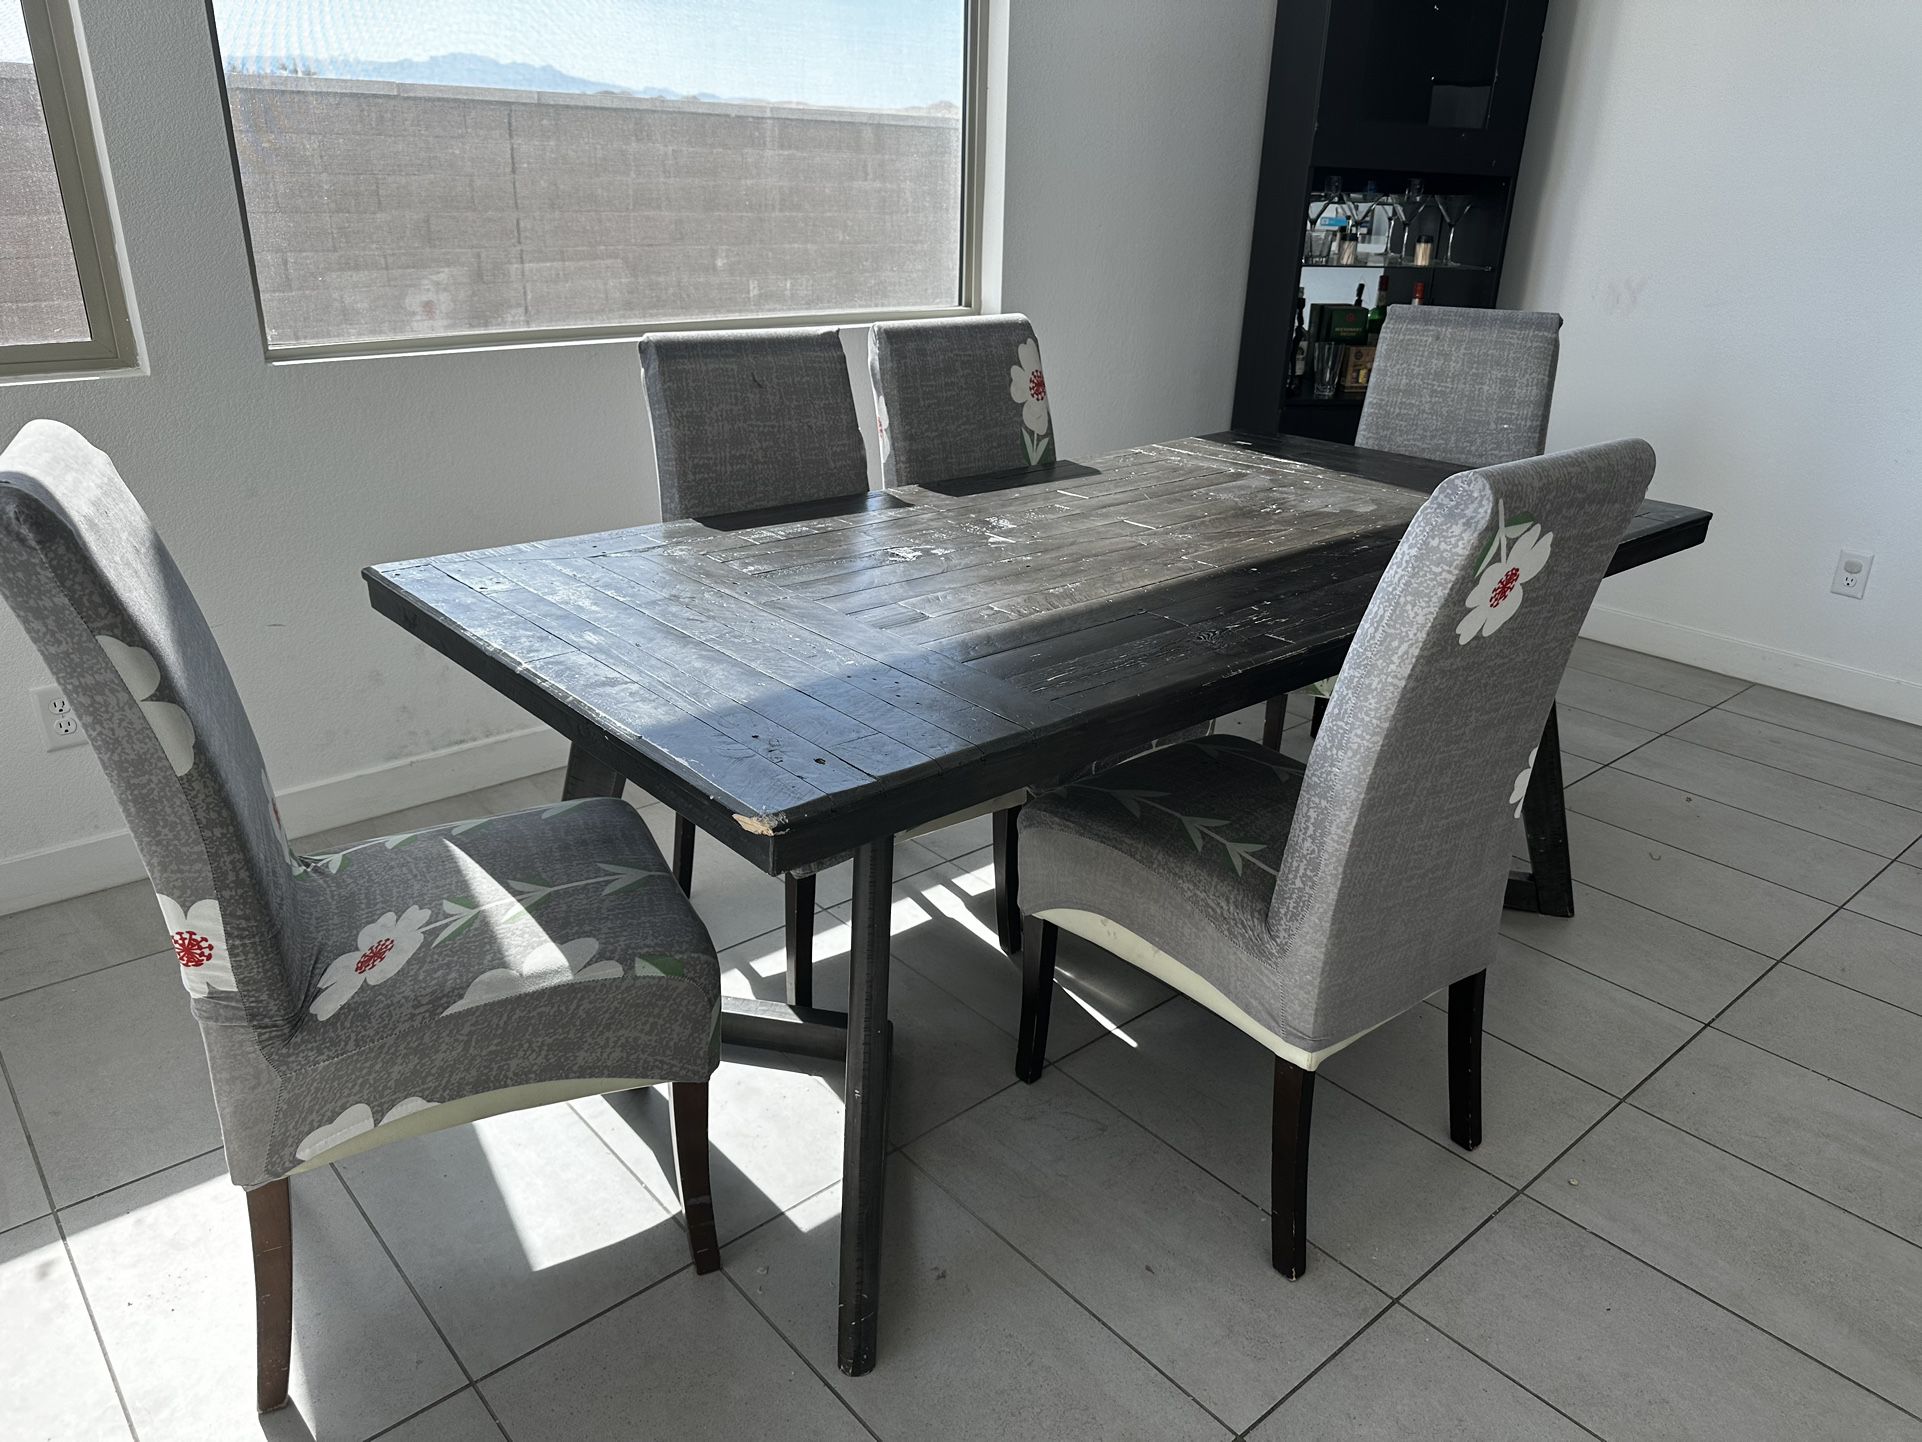 Full Sized Dining Room Table And Chairs 